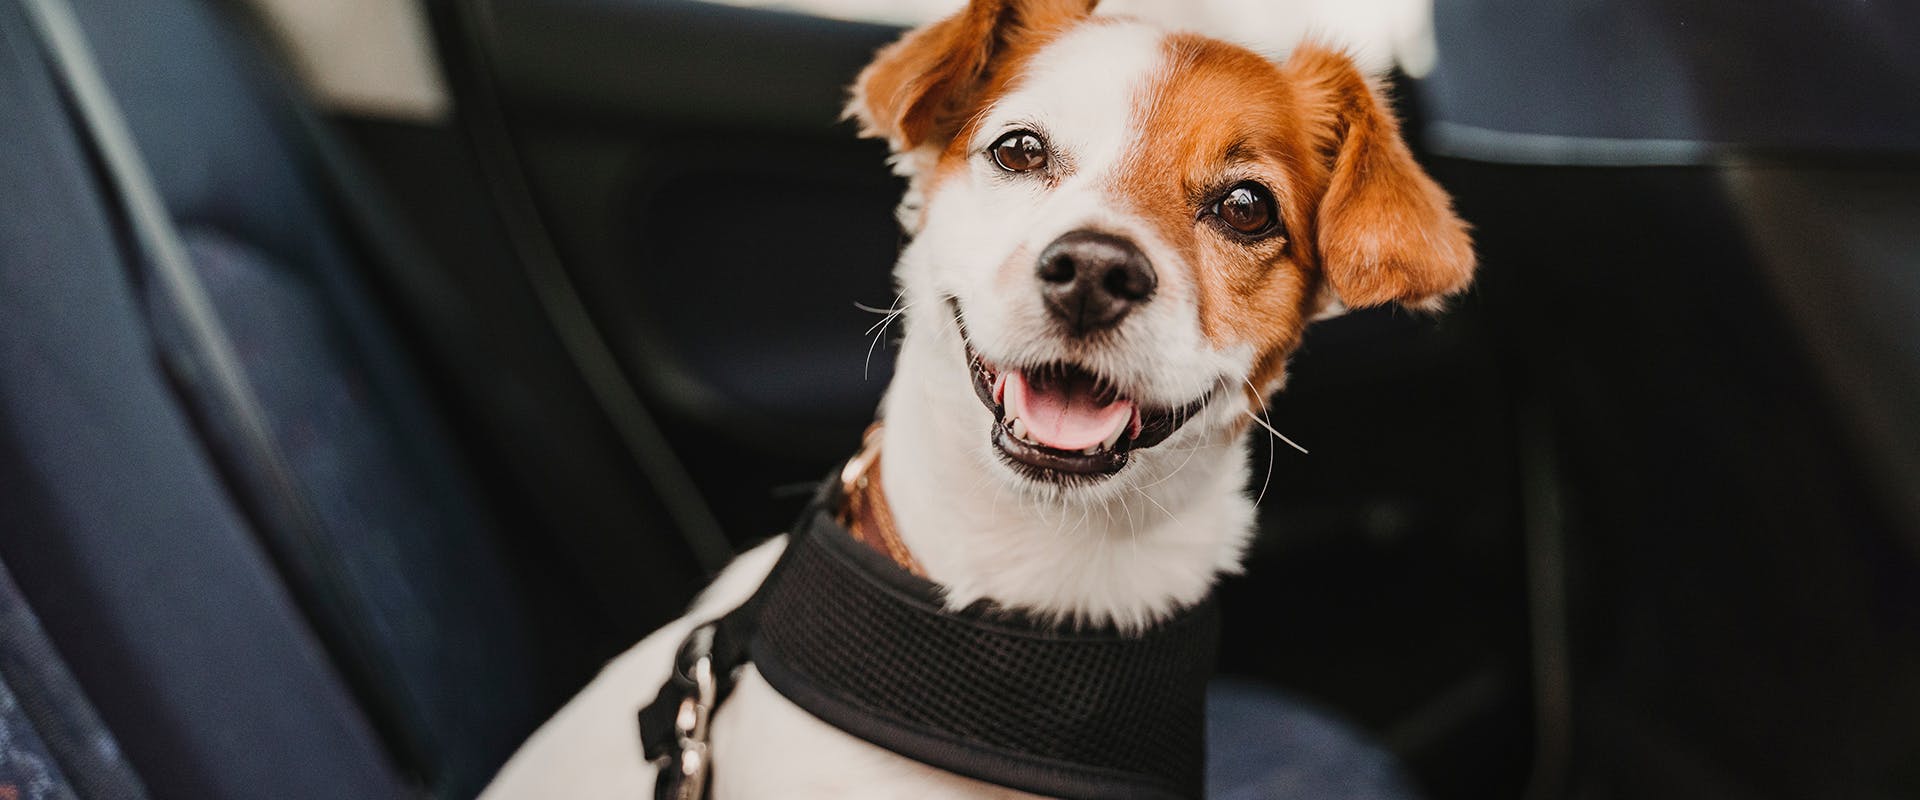 A happy dog sitting in a car, wearing a small dog harness